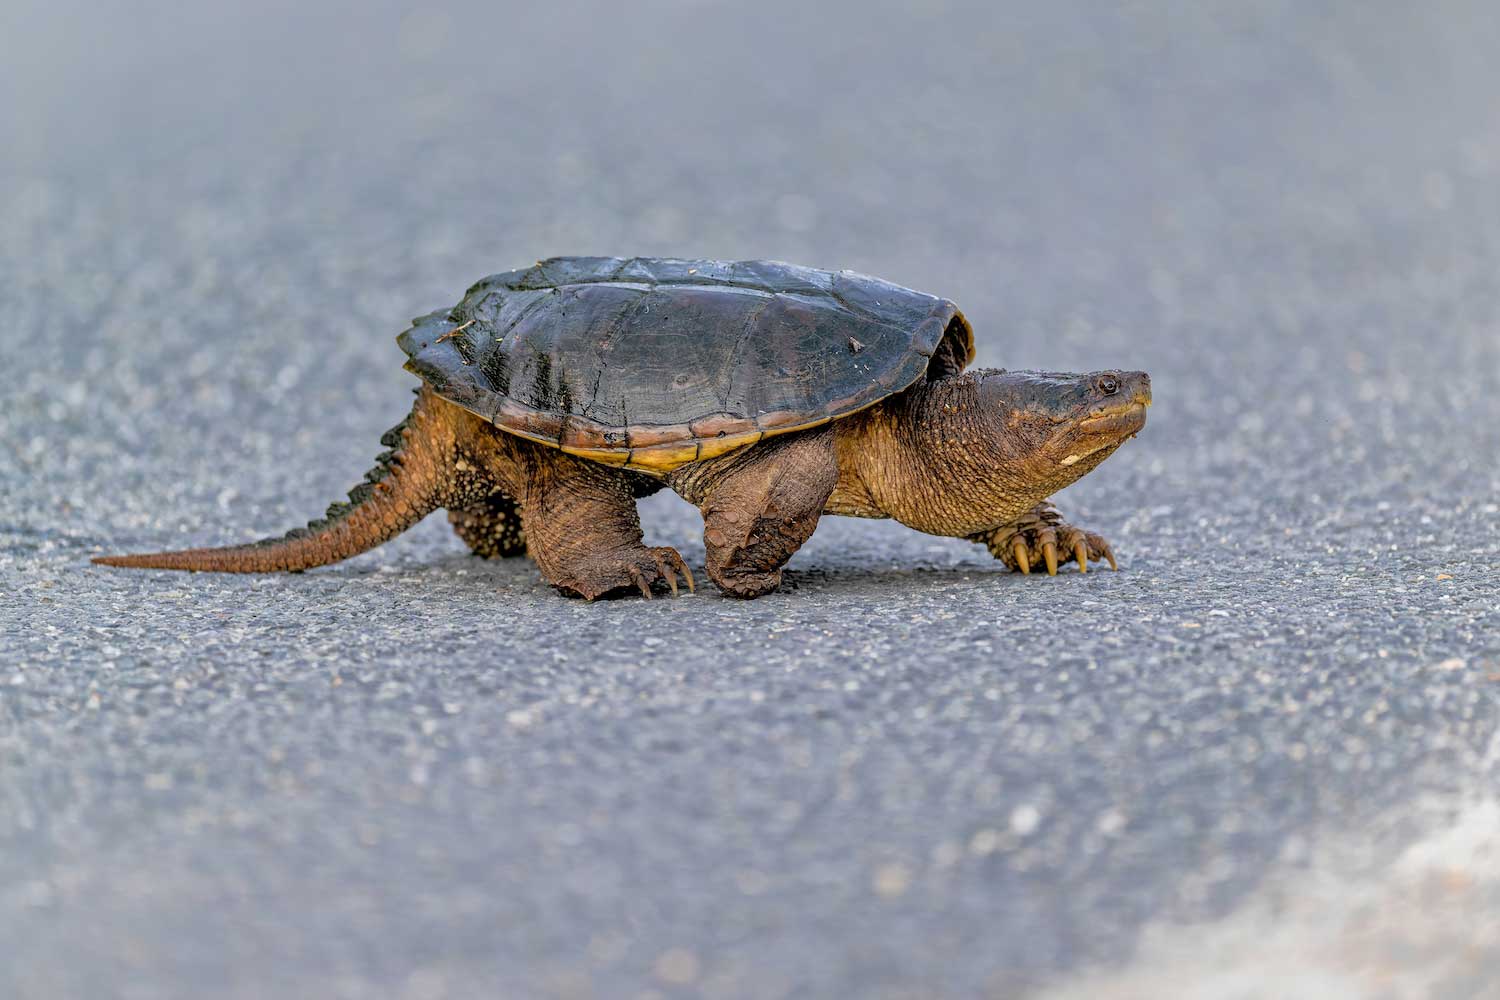 A snapping turtle on a trail.